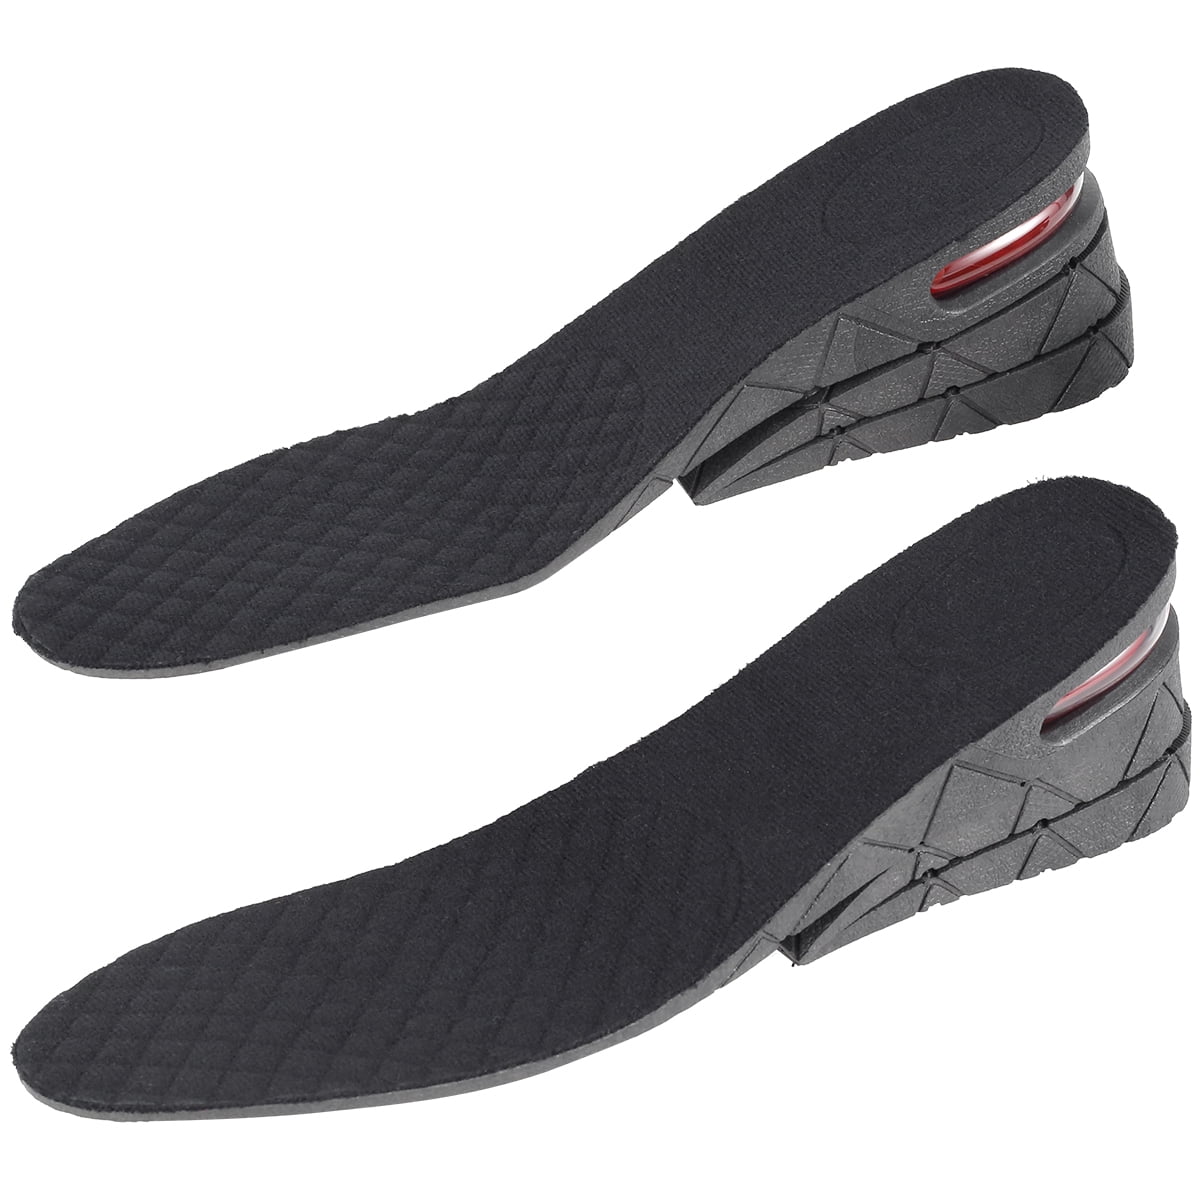 Left and Right 3 Layer Man 6 cm 2.5 inches Increase Height Insole Taller Pad 